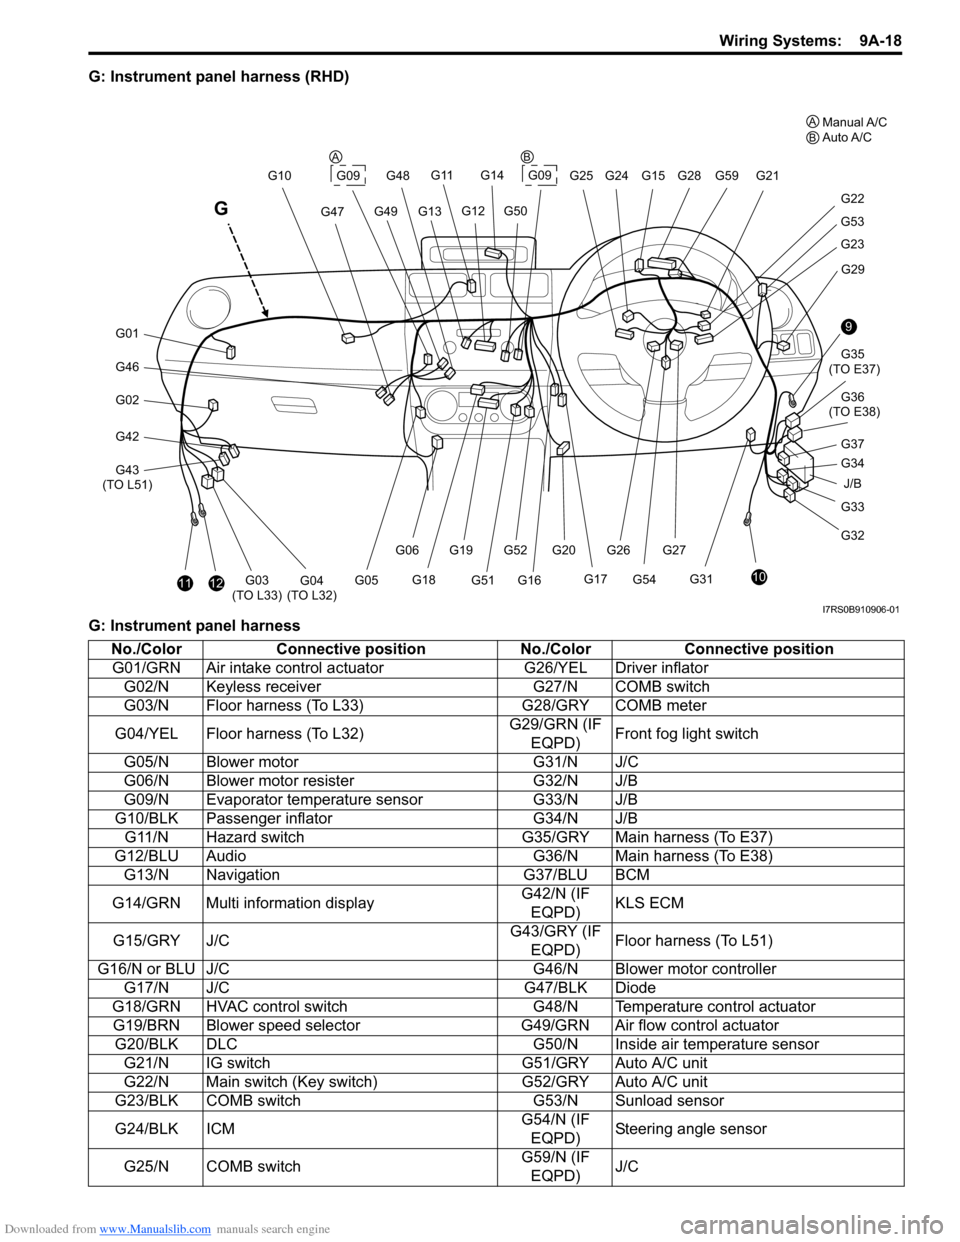 SUZUKI SWIFT 2007 2.G Service Workshop Manual Downloaded from www.Manualslib.com manuals search engine Wiring Systems:  9A-18
G: Instrument panel harness (RHD)
G: Instrument panel harness
J/B
9
10
G33
G32 G34 G35
 (TO E37)
G36
 (TO E38)
G31 G29
G